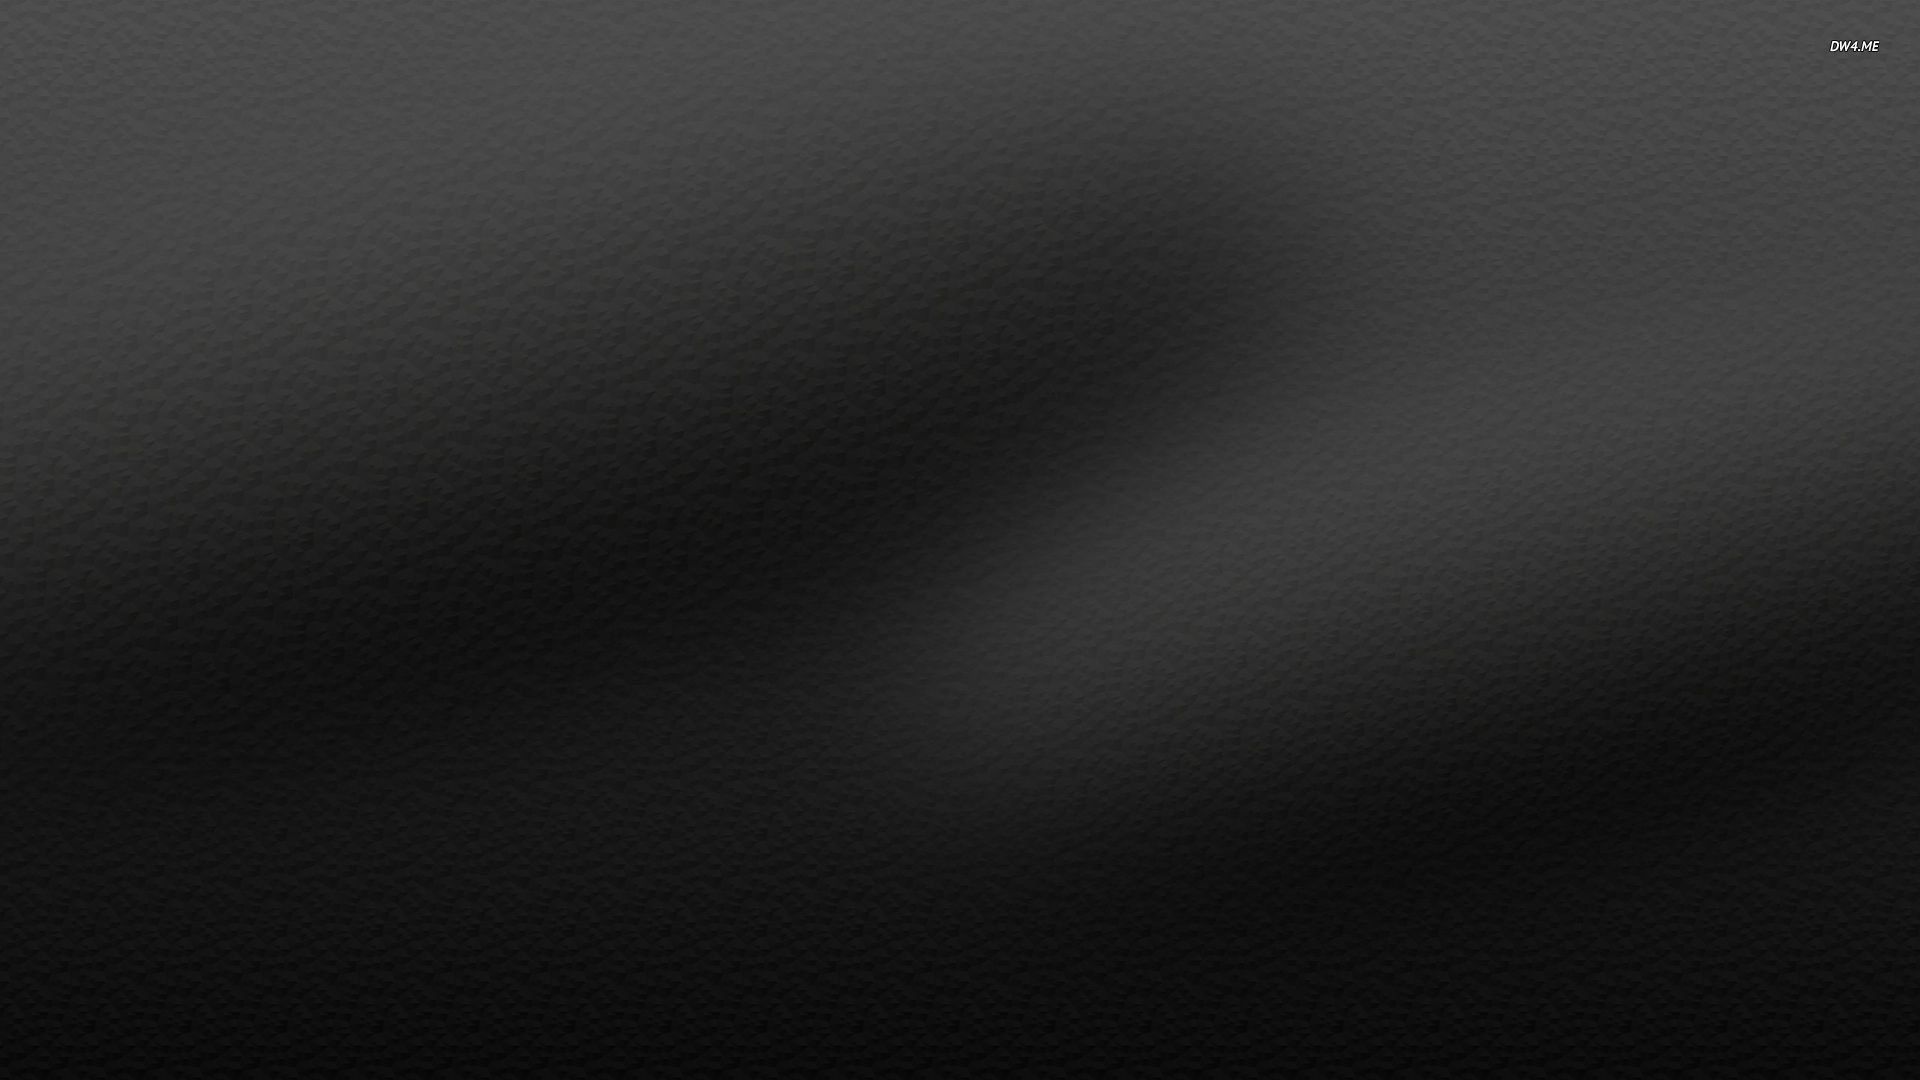 Black leather wallpaper - Minimalistic wallpapers - #167